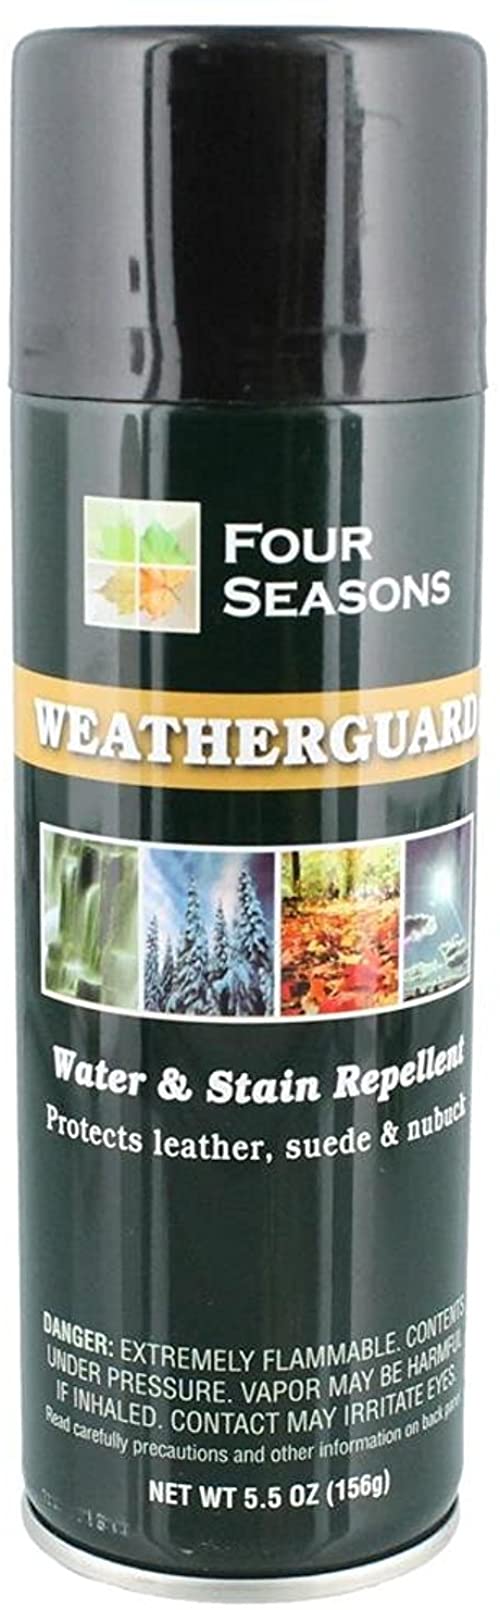 Four Seasons Weatherguard Water &amp; Stain Repellent 5.5oz